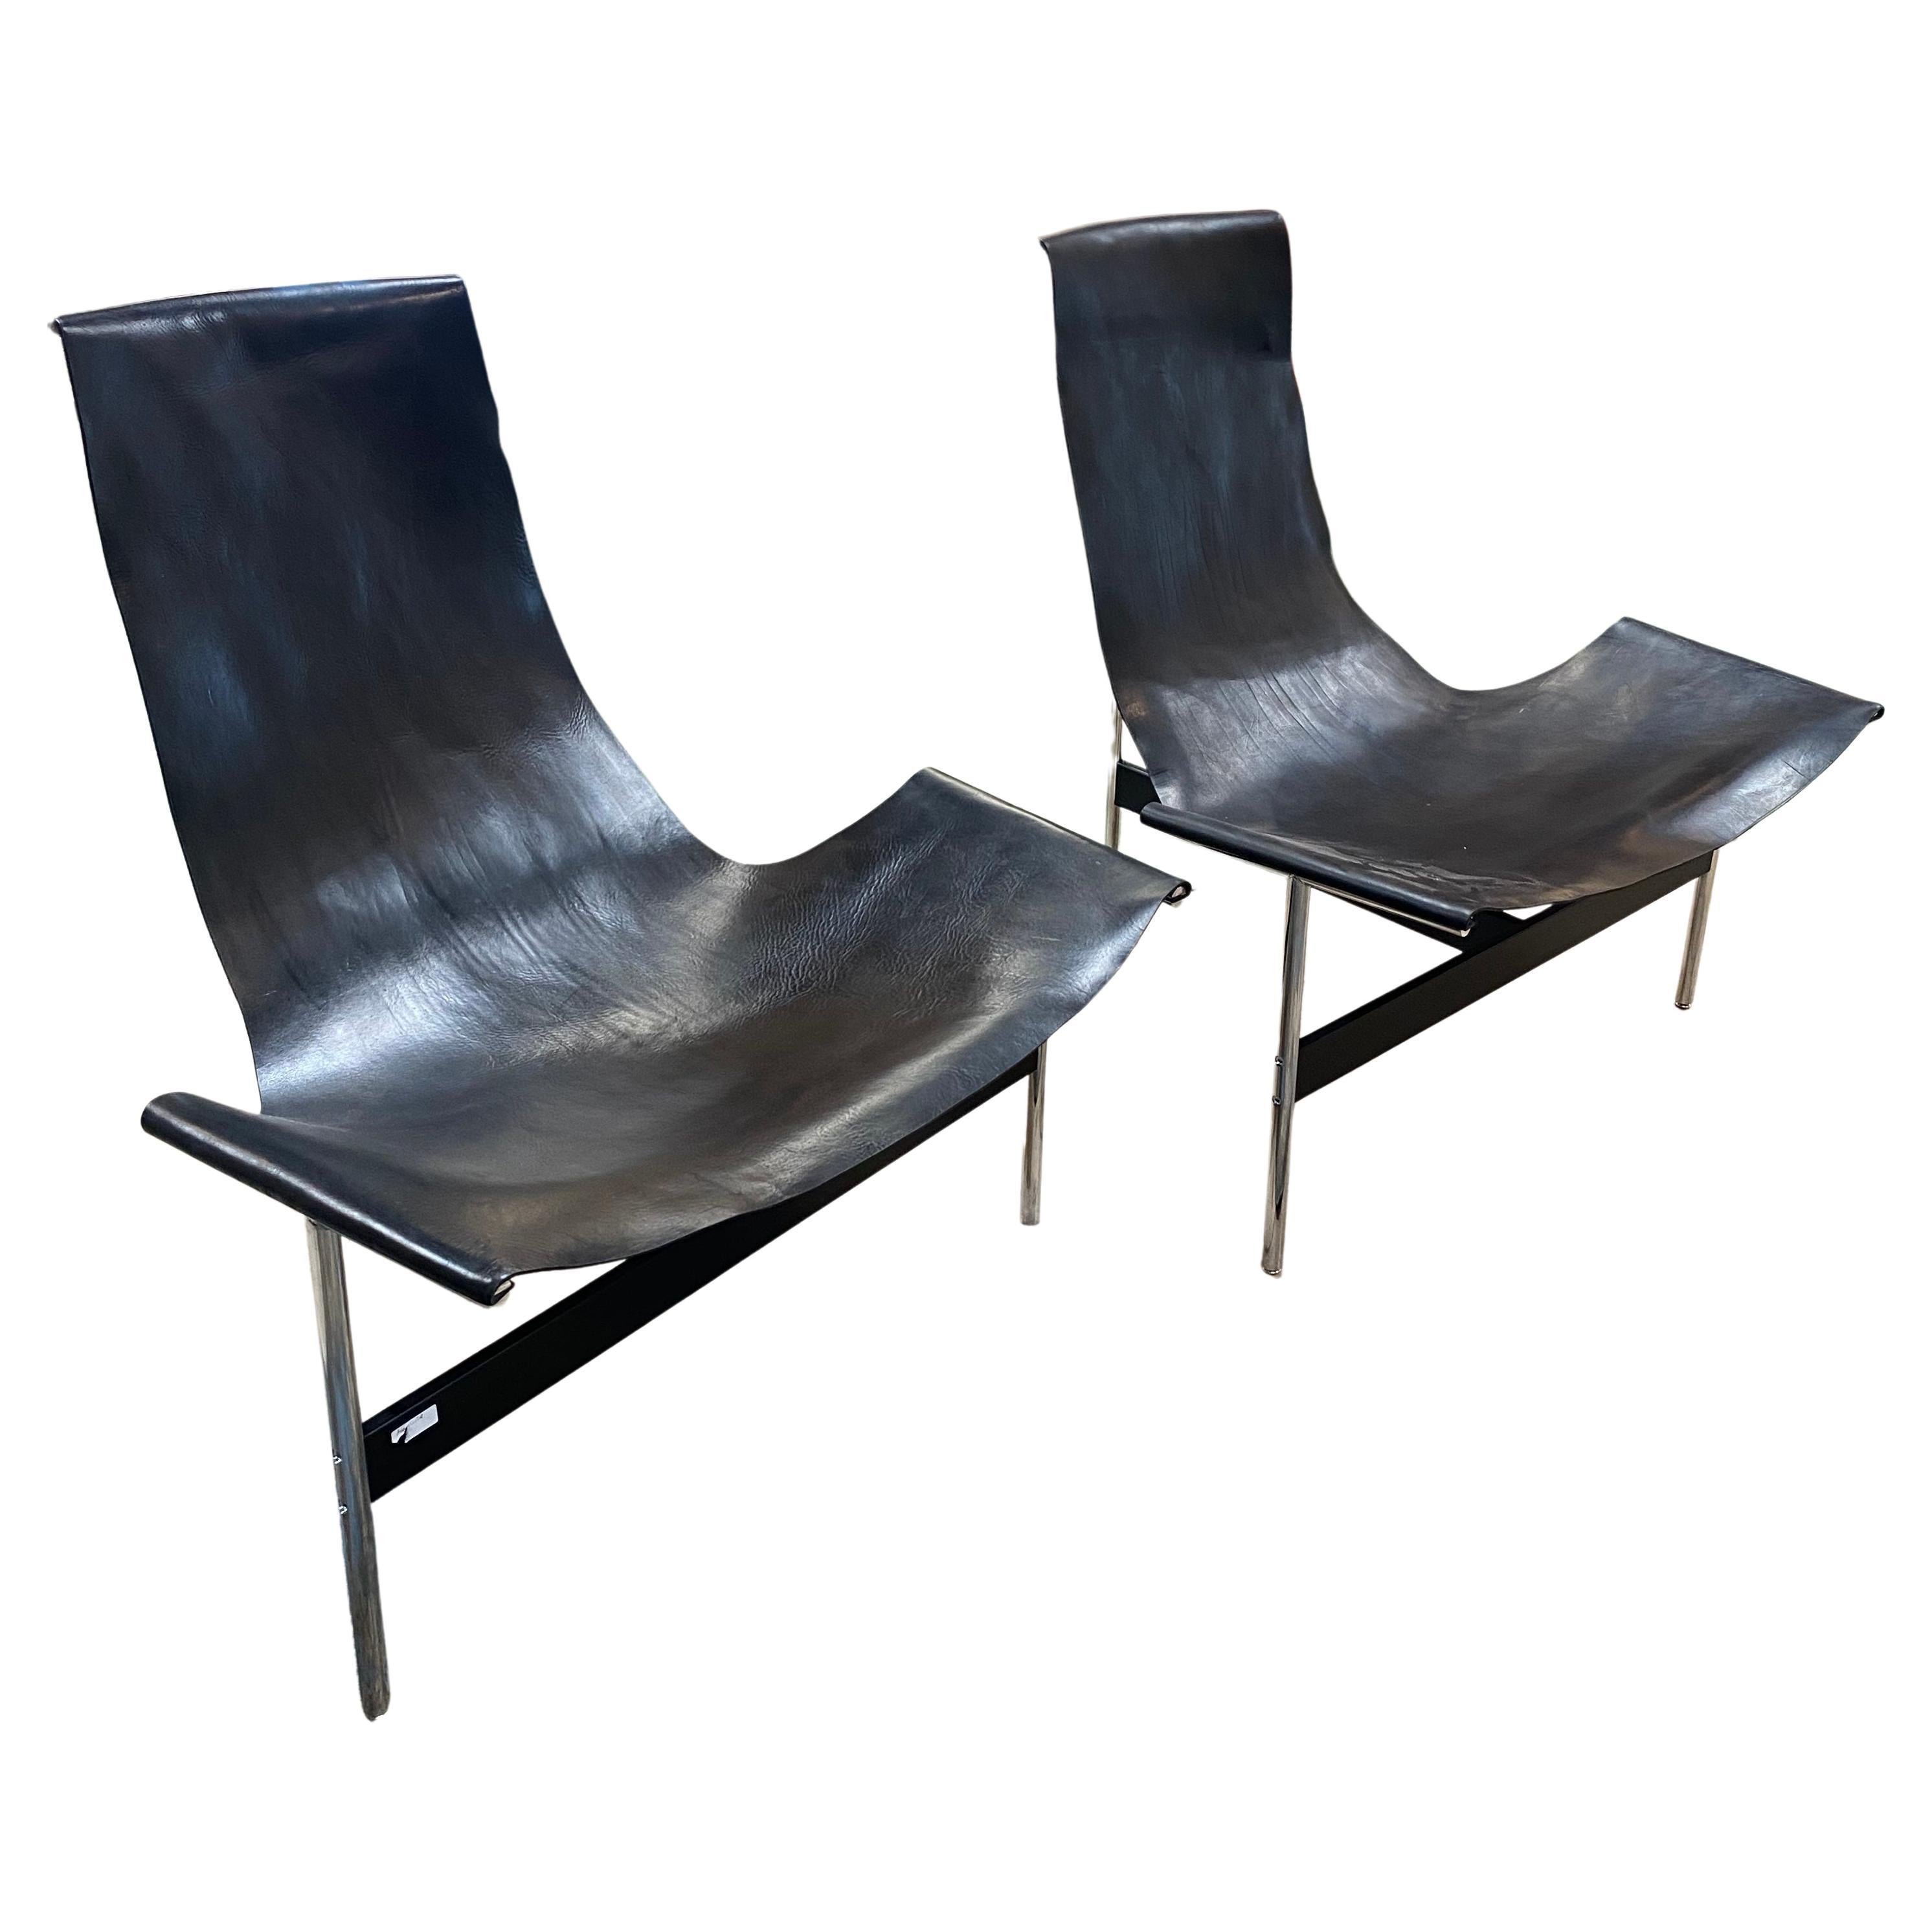 Pair of 2 Lounge Chair by Katavolos, Littell, & Kelley for Laverne International